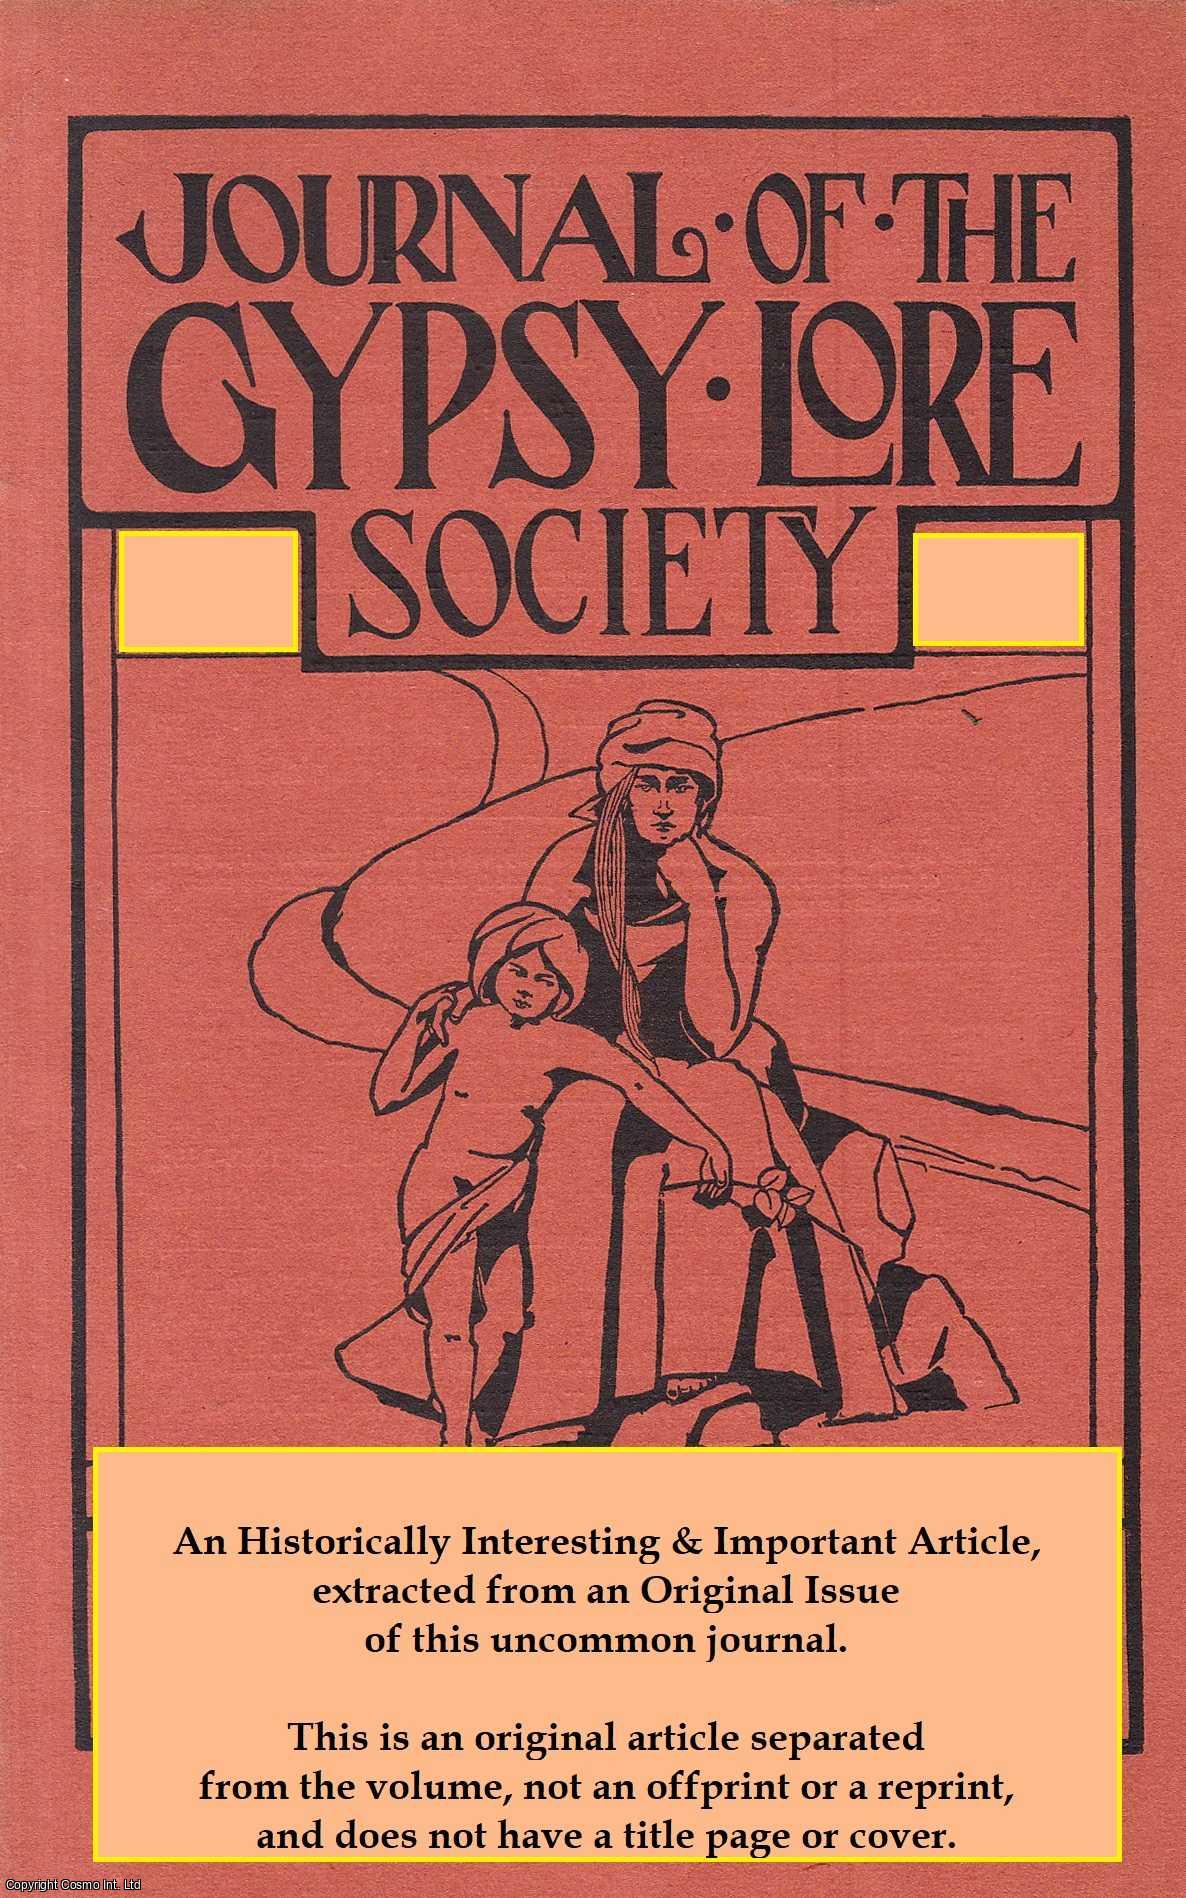 Rev. J. Breay - Romany Christ. An uncommon original article from the Journal of the Gypsy Lore Society, 1968.